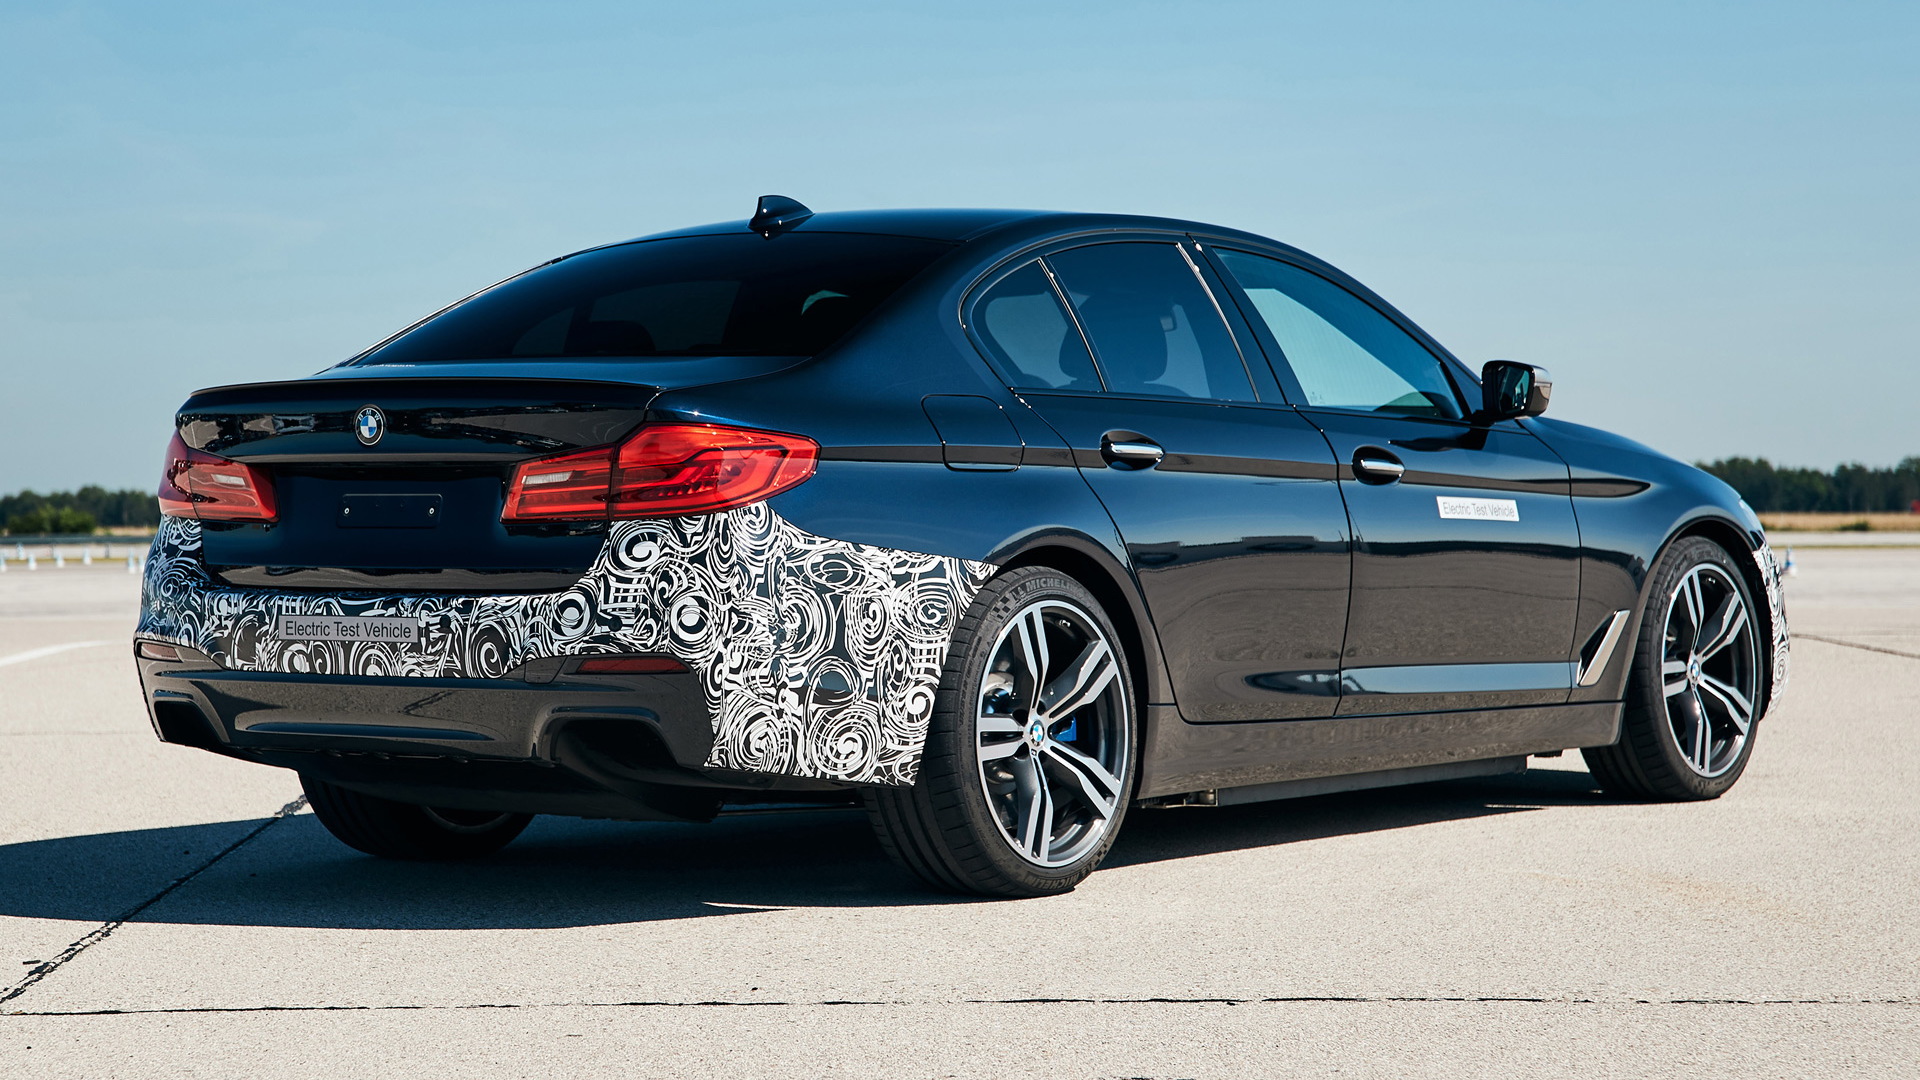 BMW 5-Series test mule fitted with fifth-generation electric drive system